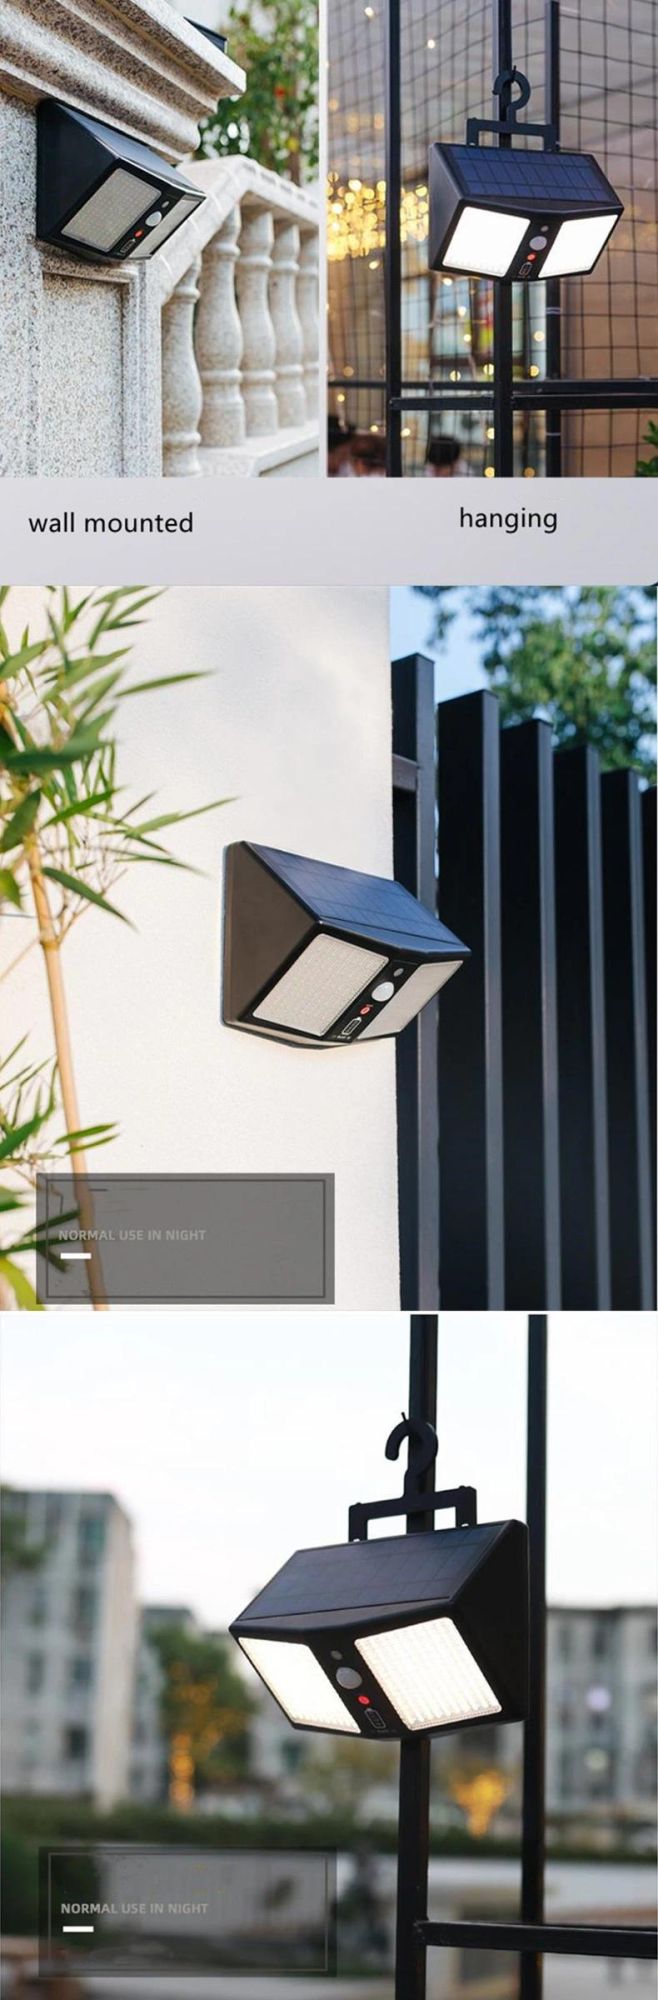 Outdoor Decorative Solar LED Garden Light with Lithium Battery